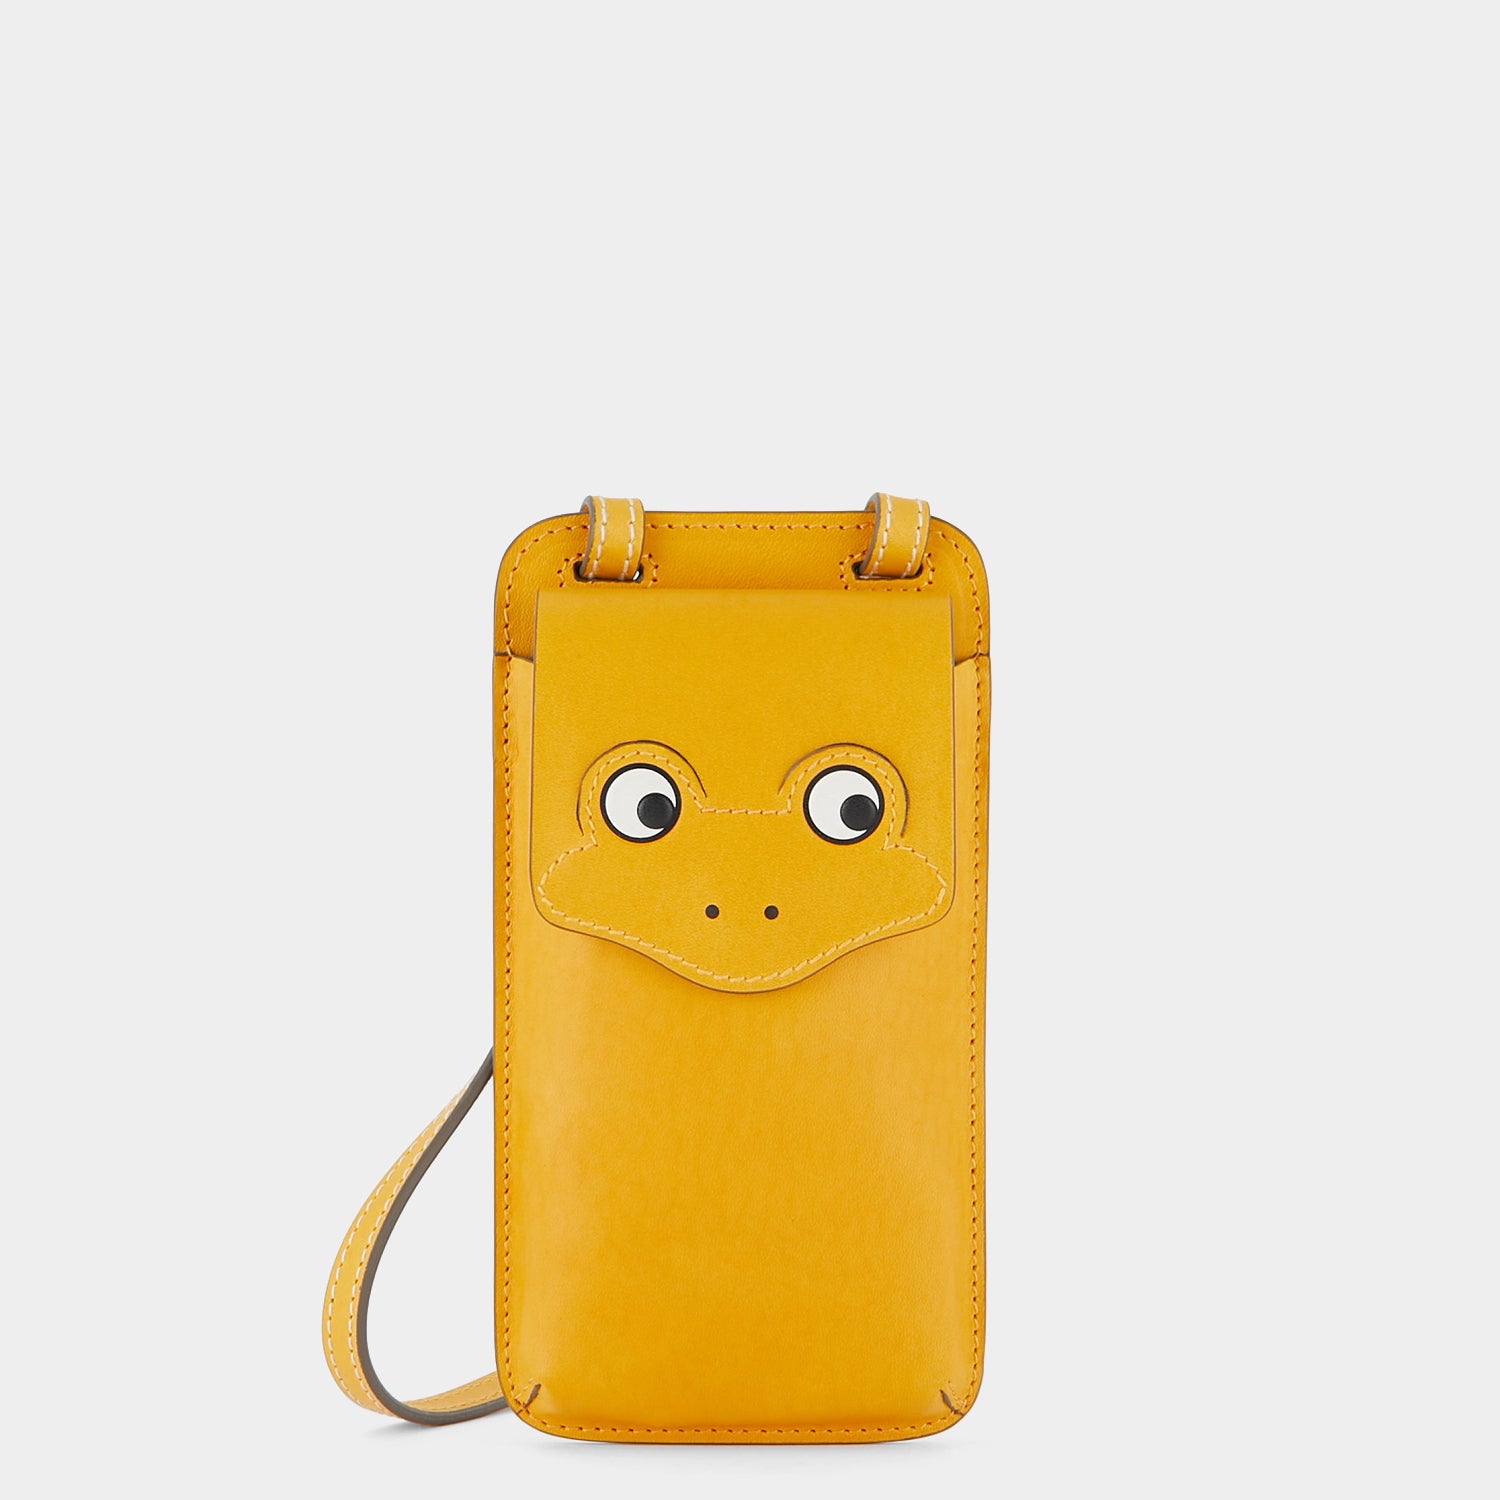 Return to Nature Phone Pouch on Strap | Anya Hindmarch US